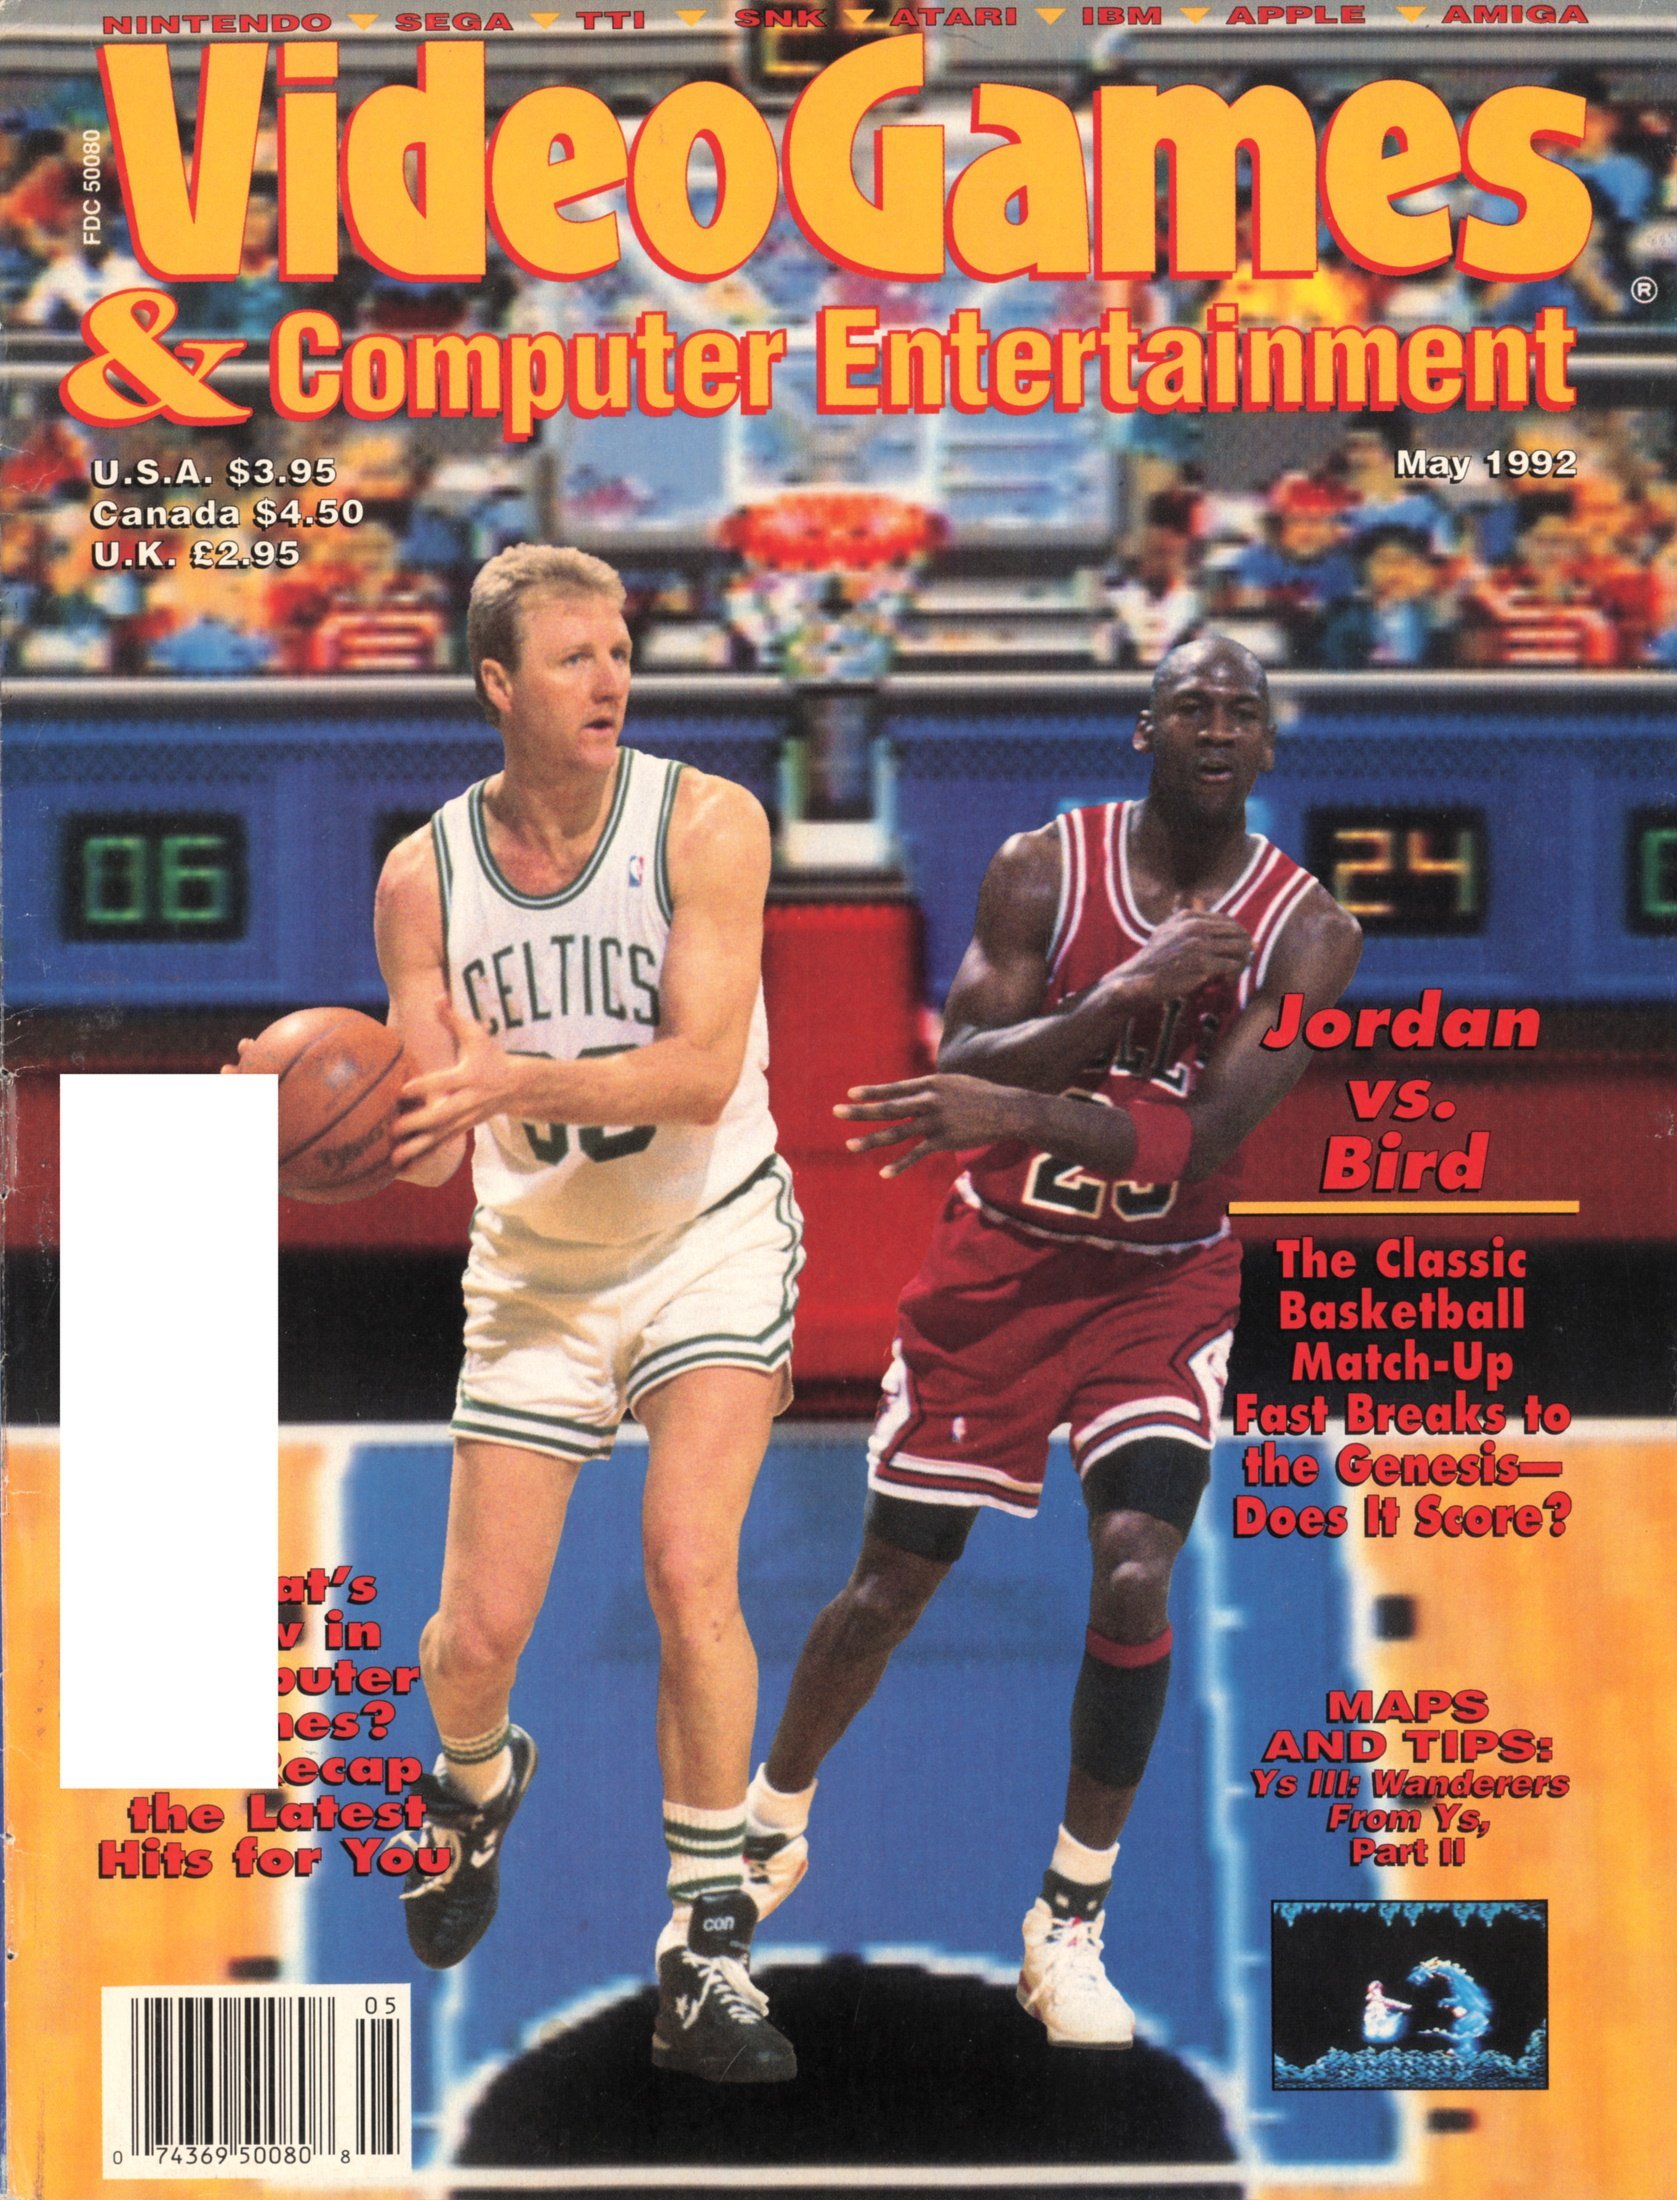 Video Games and Computer Entertainment Issue 40 May 1992 - VideoGames and Computer Entertainment